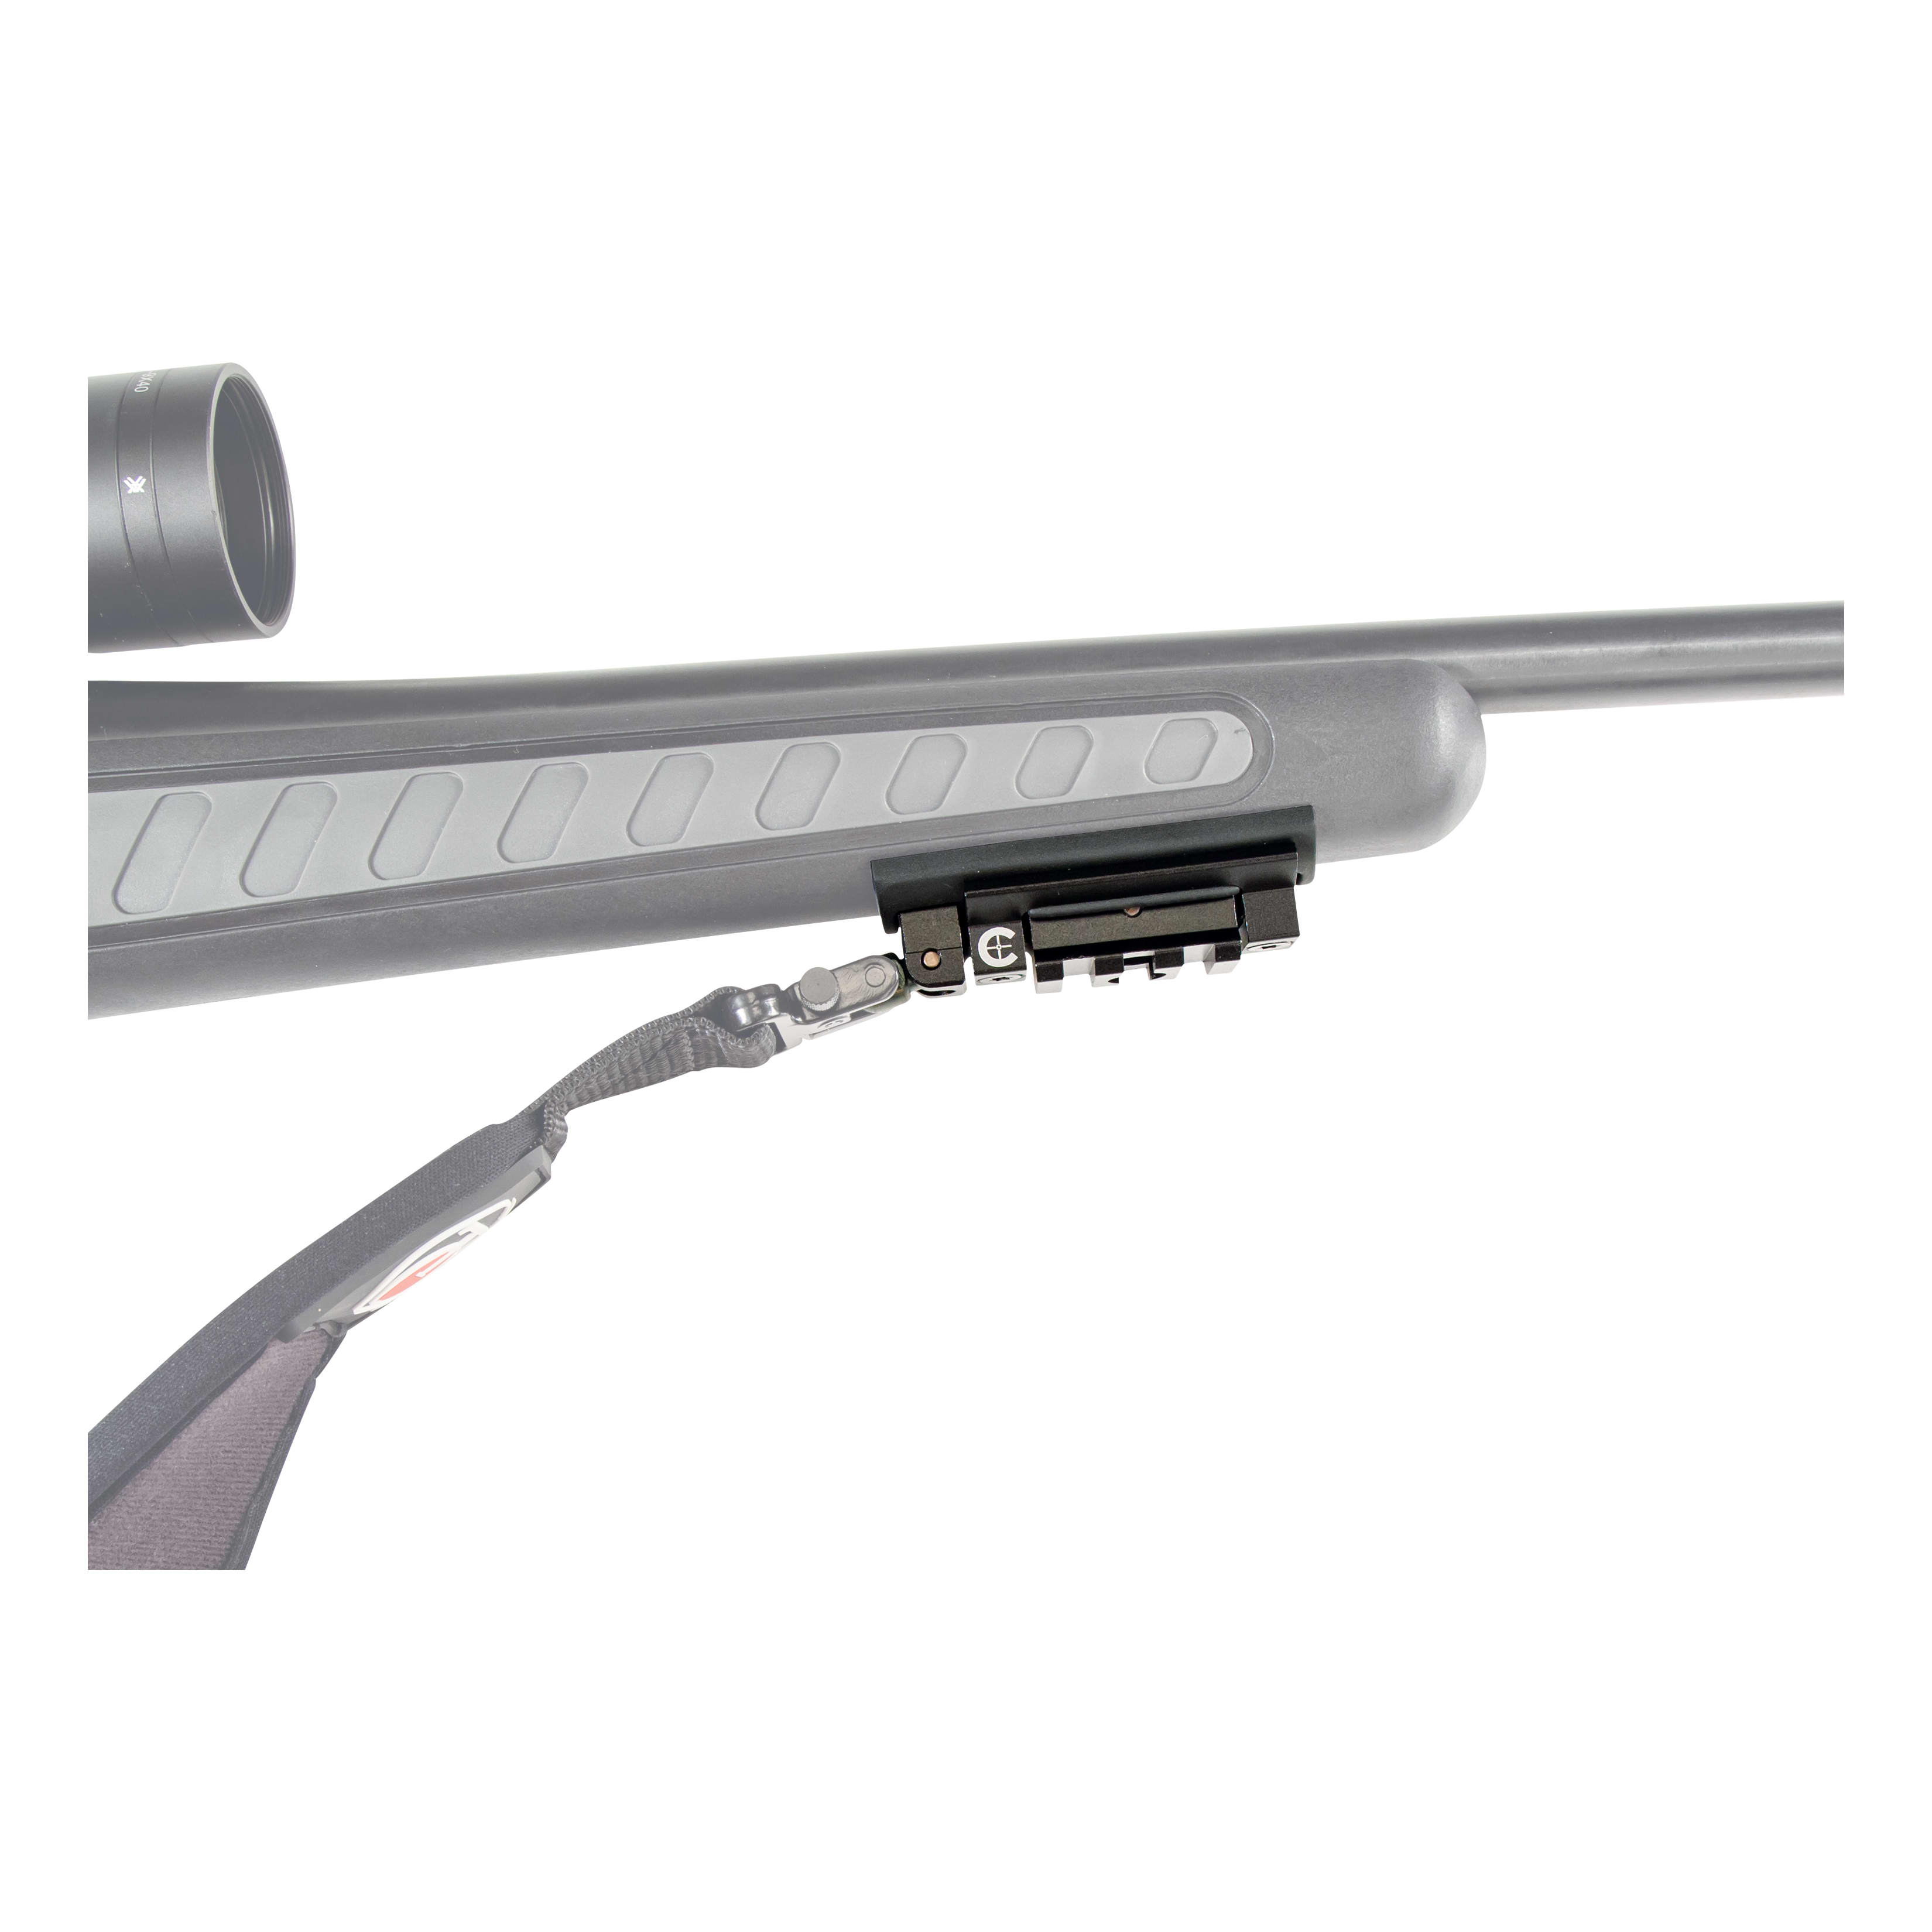 Caldwell® Pic Rail Adapter - Sling Attached